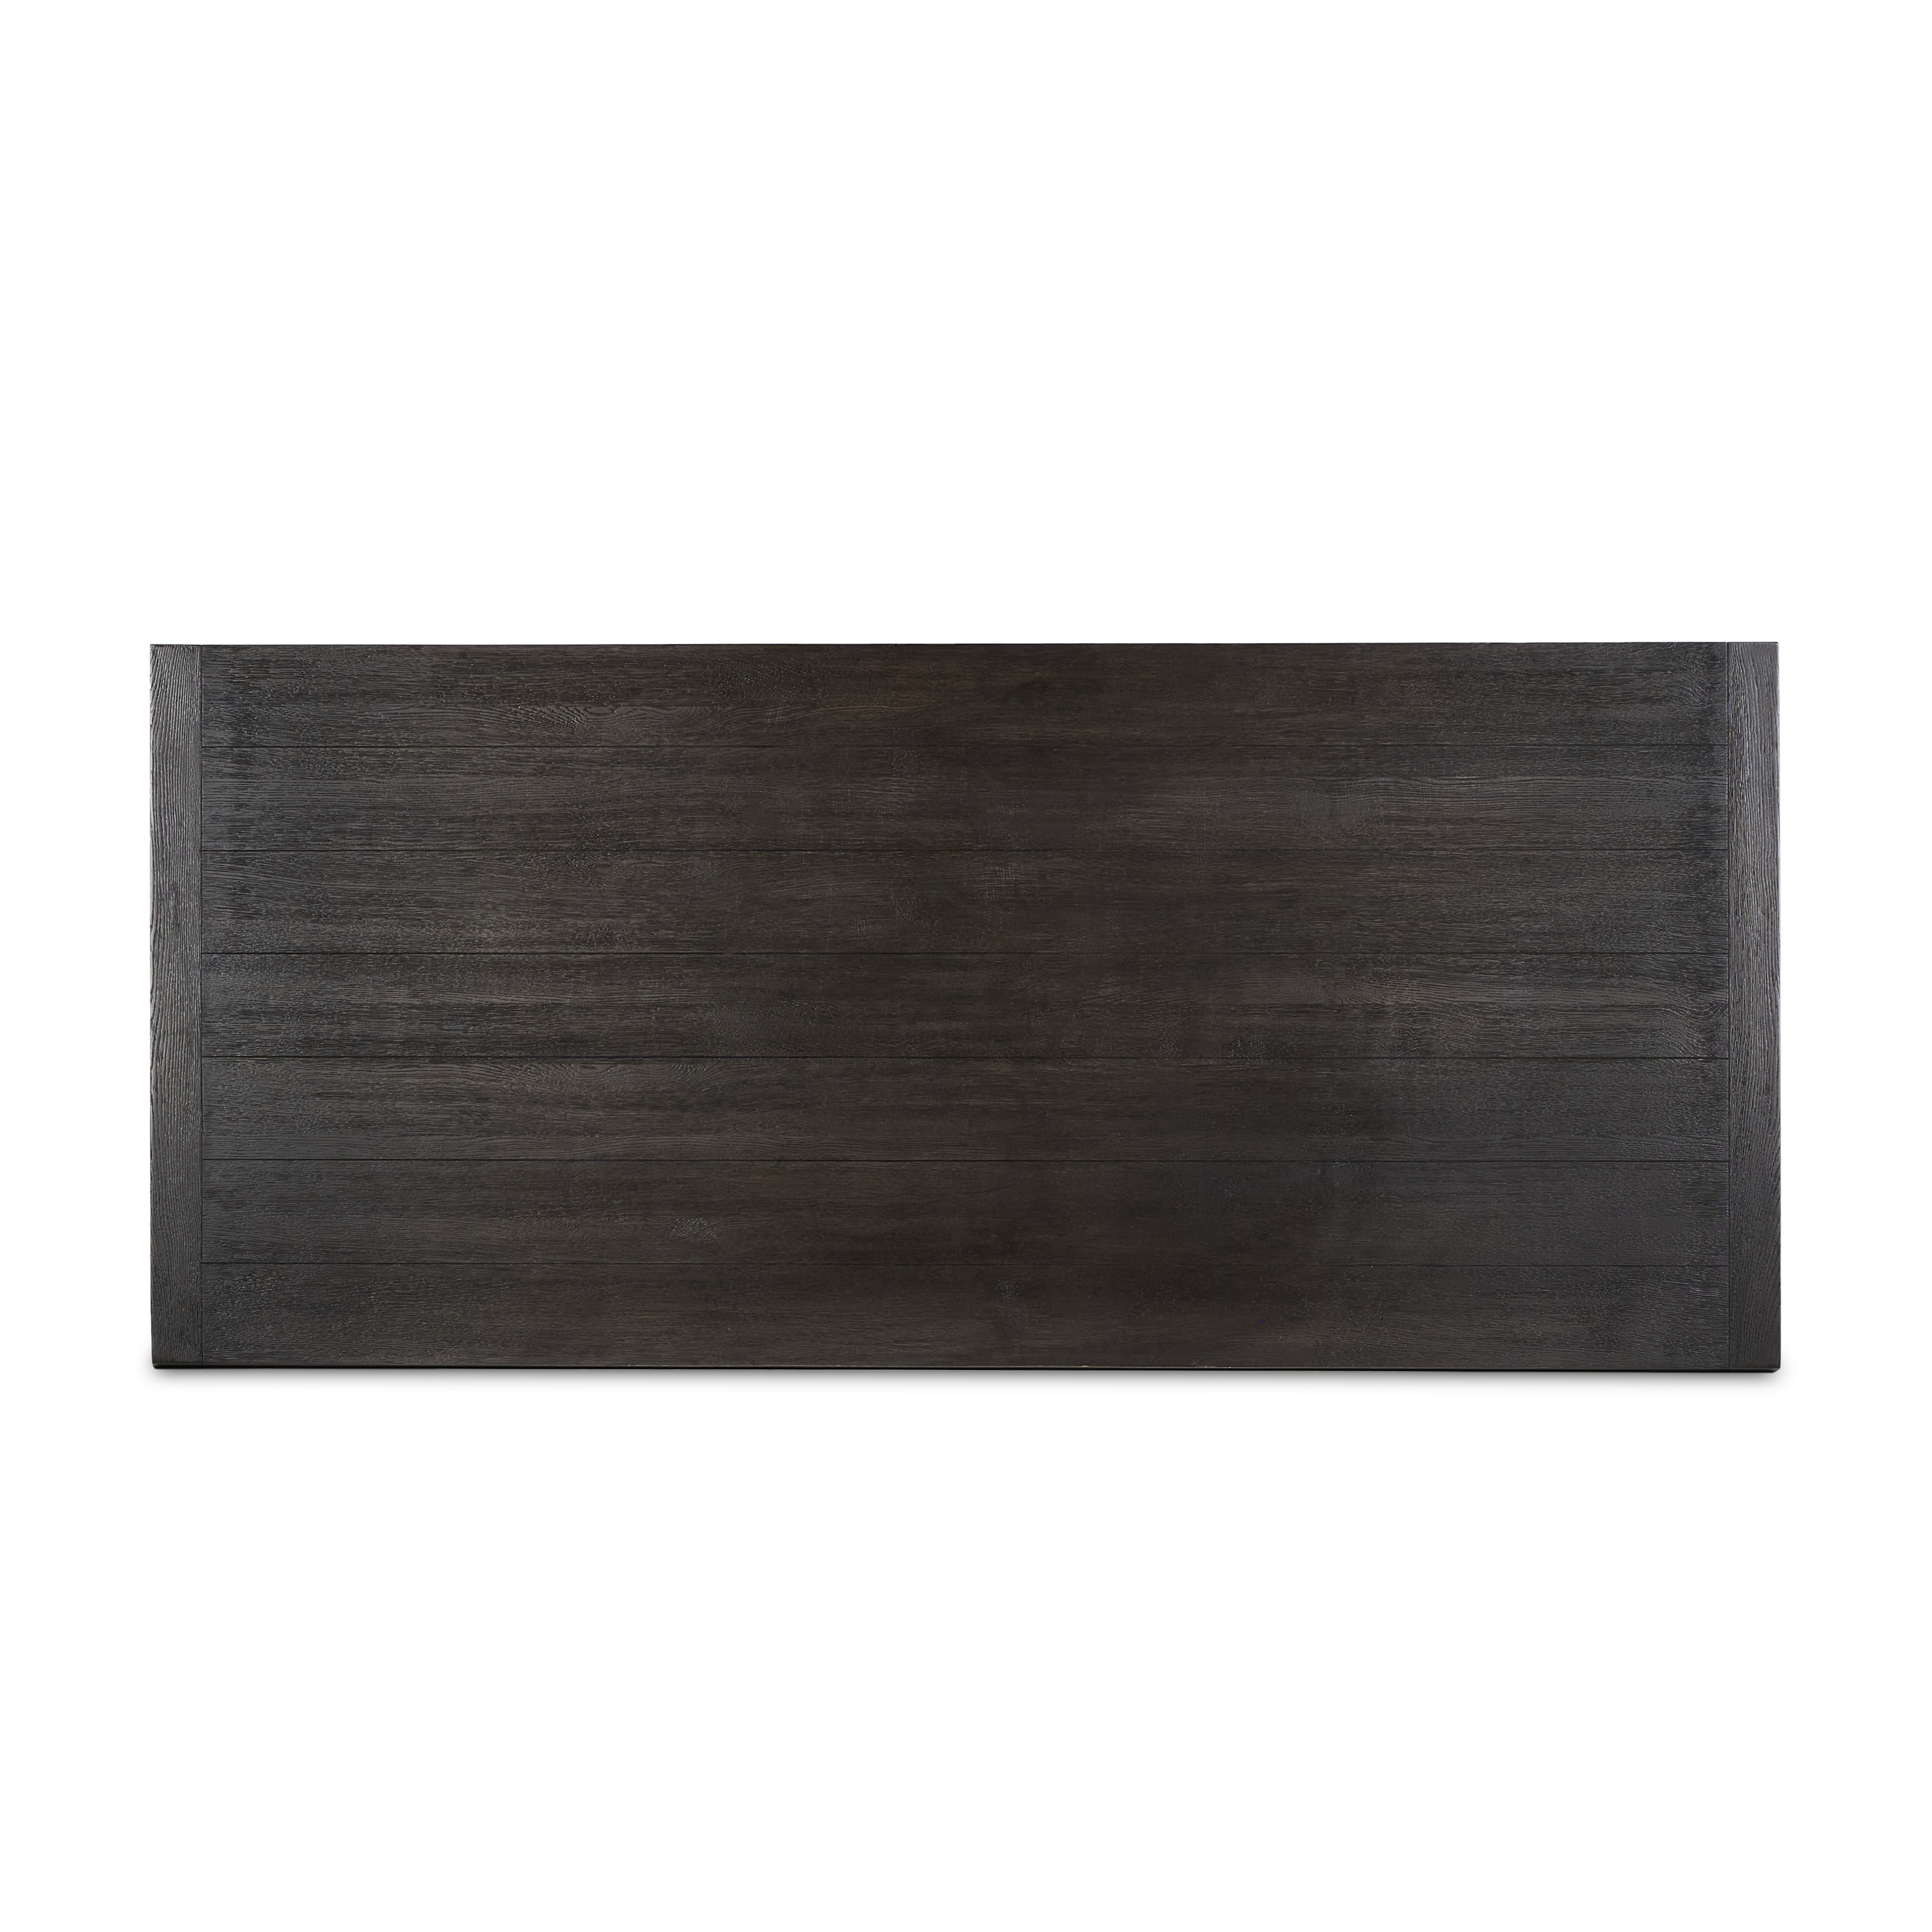 Warby Dining Table 94"-Worn Black Oak - Image 5